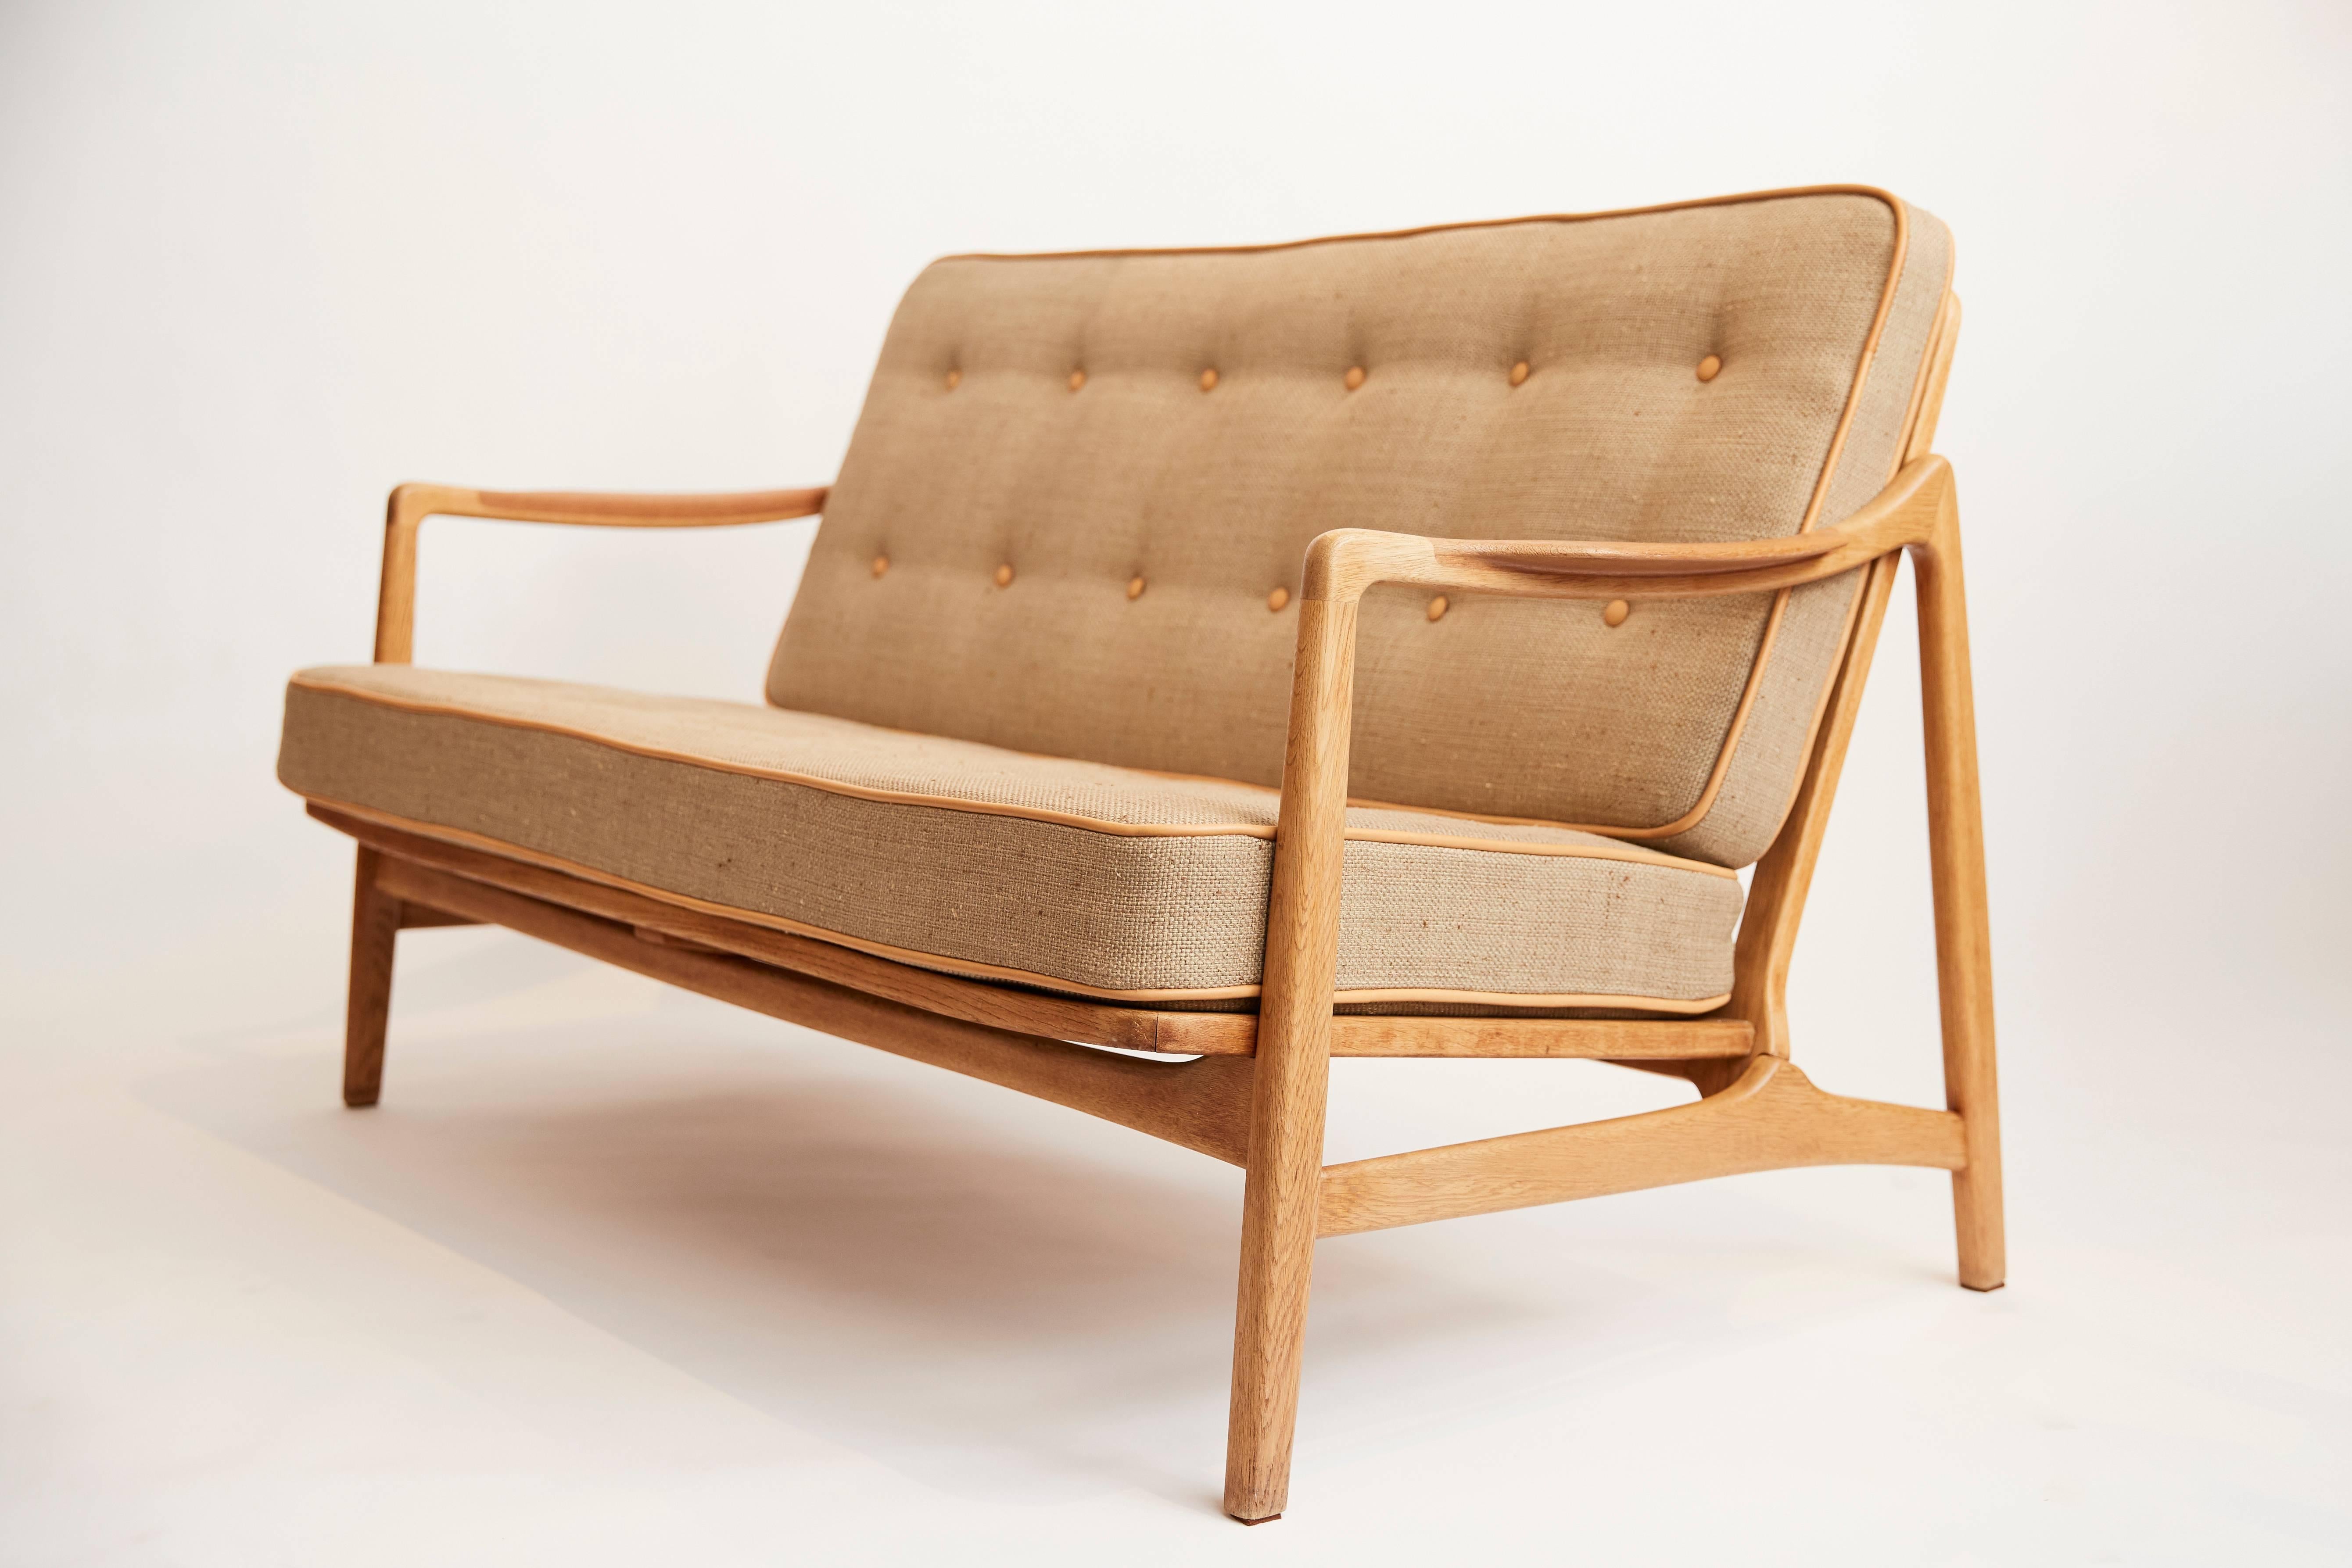 Two-seat sofa in oak and teak.
Model 117 edited by France & Daverkosel.
Danish work by Tove and Edvard Kindt-Larsen dating from the 1950s.